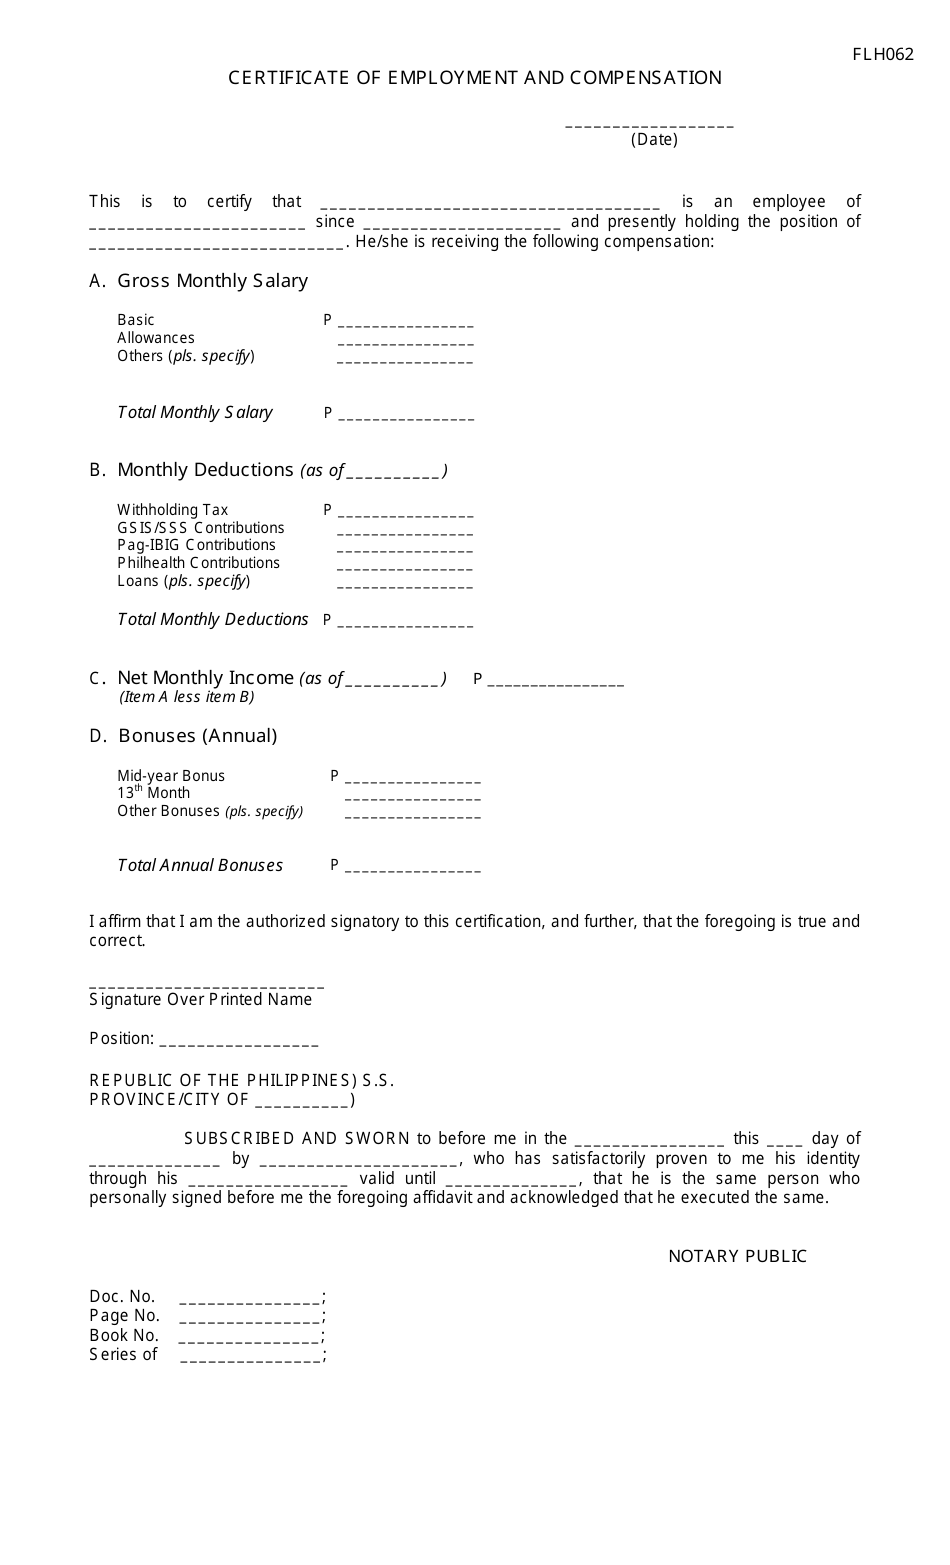 Form FLH062 Certificate of Employment and Compensation - Cotabato, Philippines, Page 1